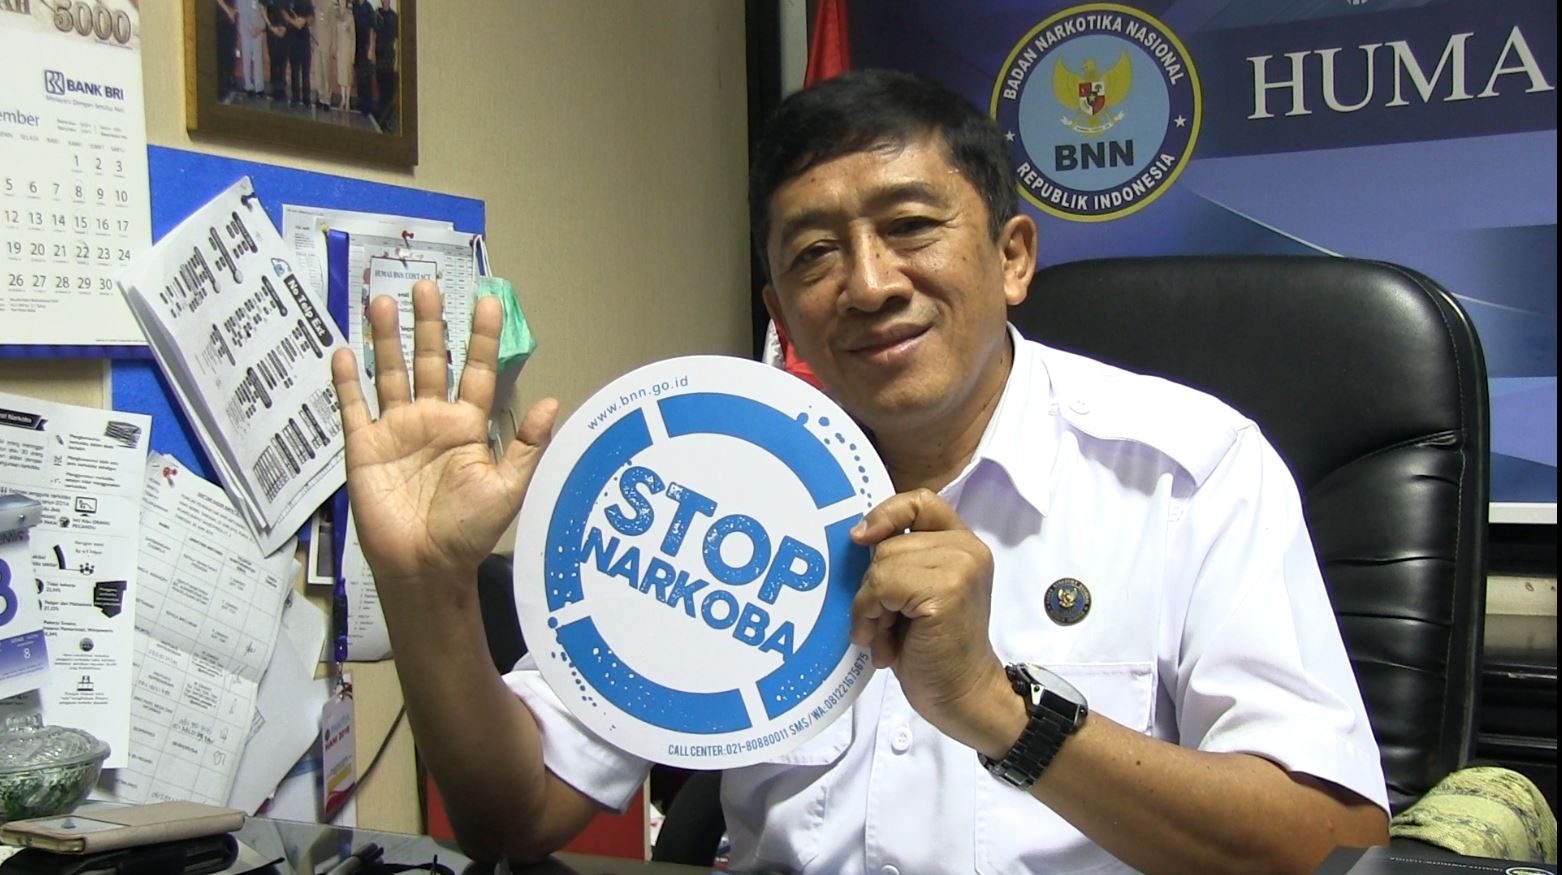  National Narcotics Agency head spokesperson, Slamet Pribadi, holds up a sticker saying "STOP DRUGS" at his office in East Jakarta. Photo by Diego Batara/Rappler 